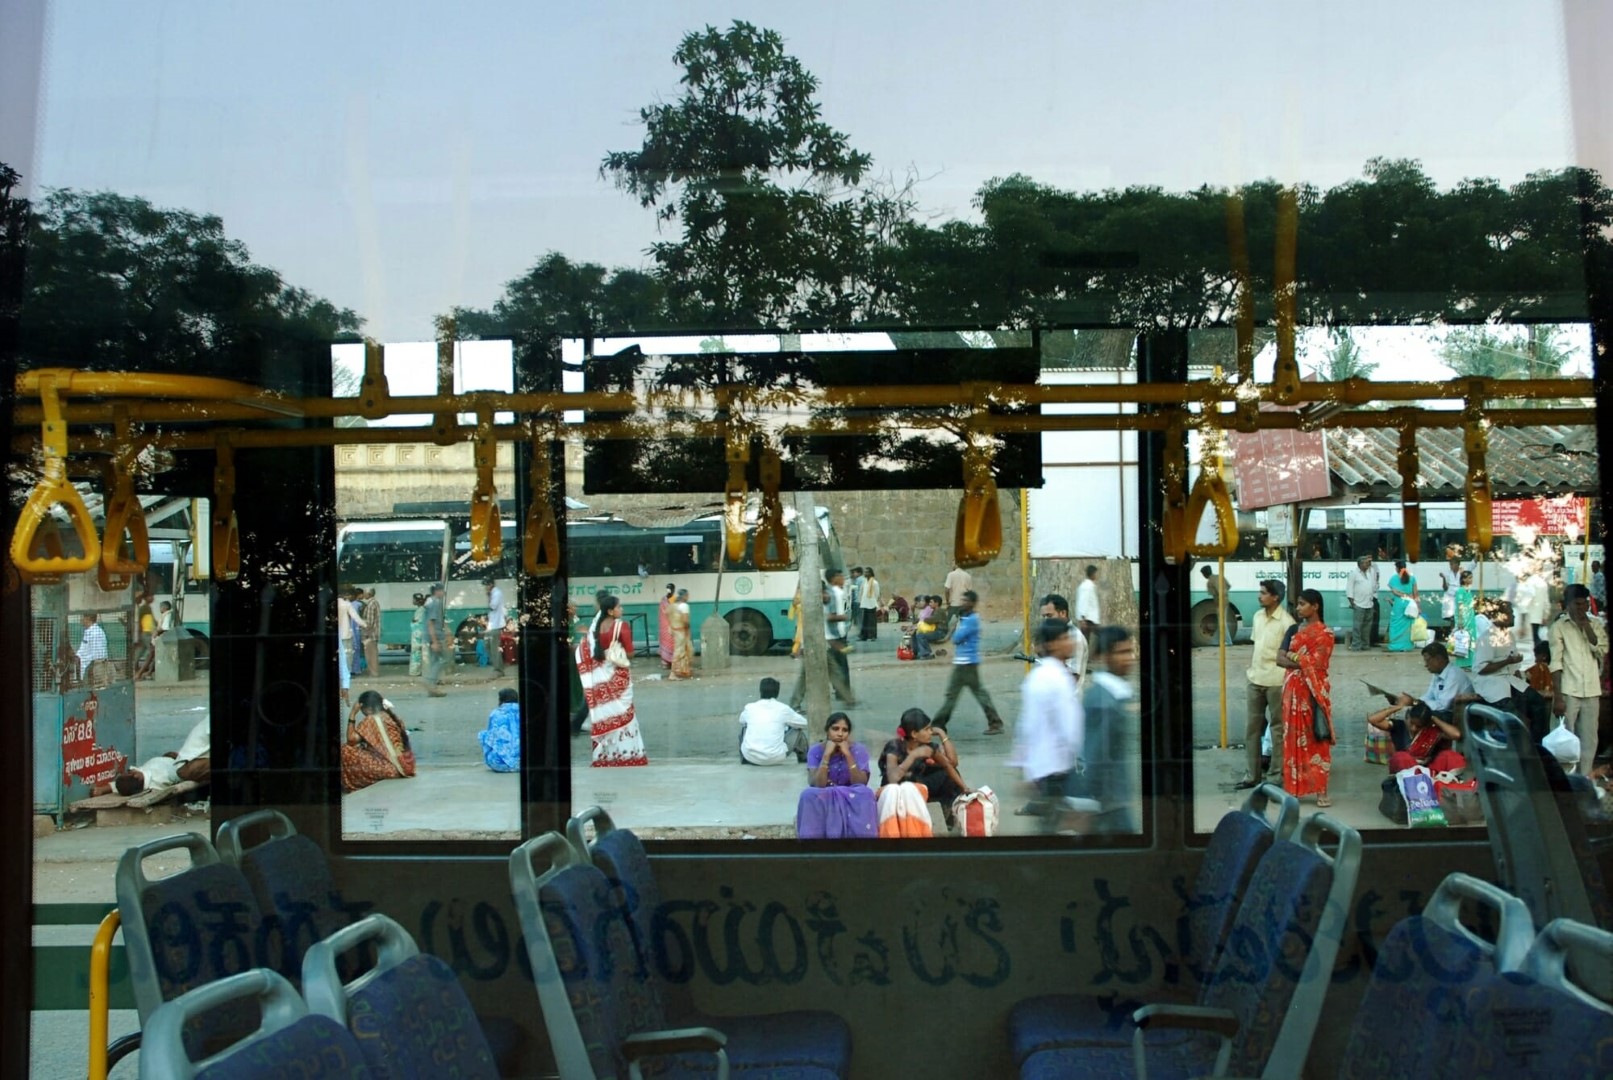 <span style="font-weight:normal;">Mysore Bus Depot, 2010</span>